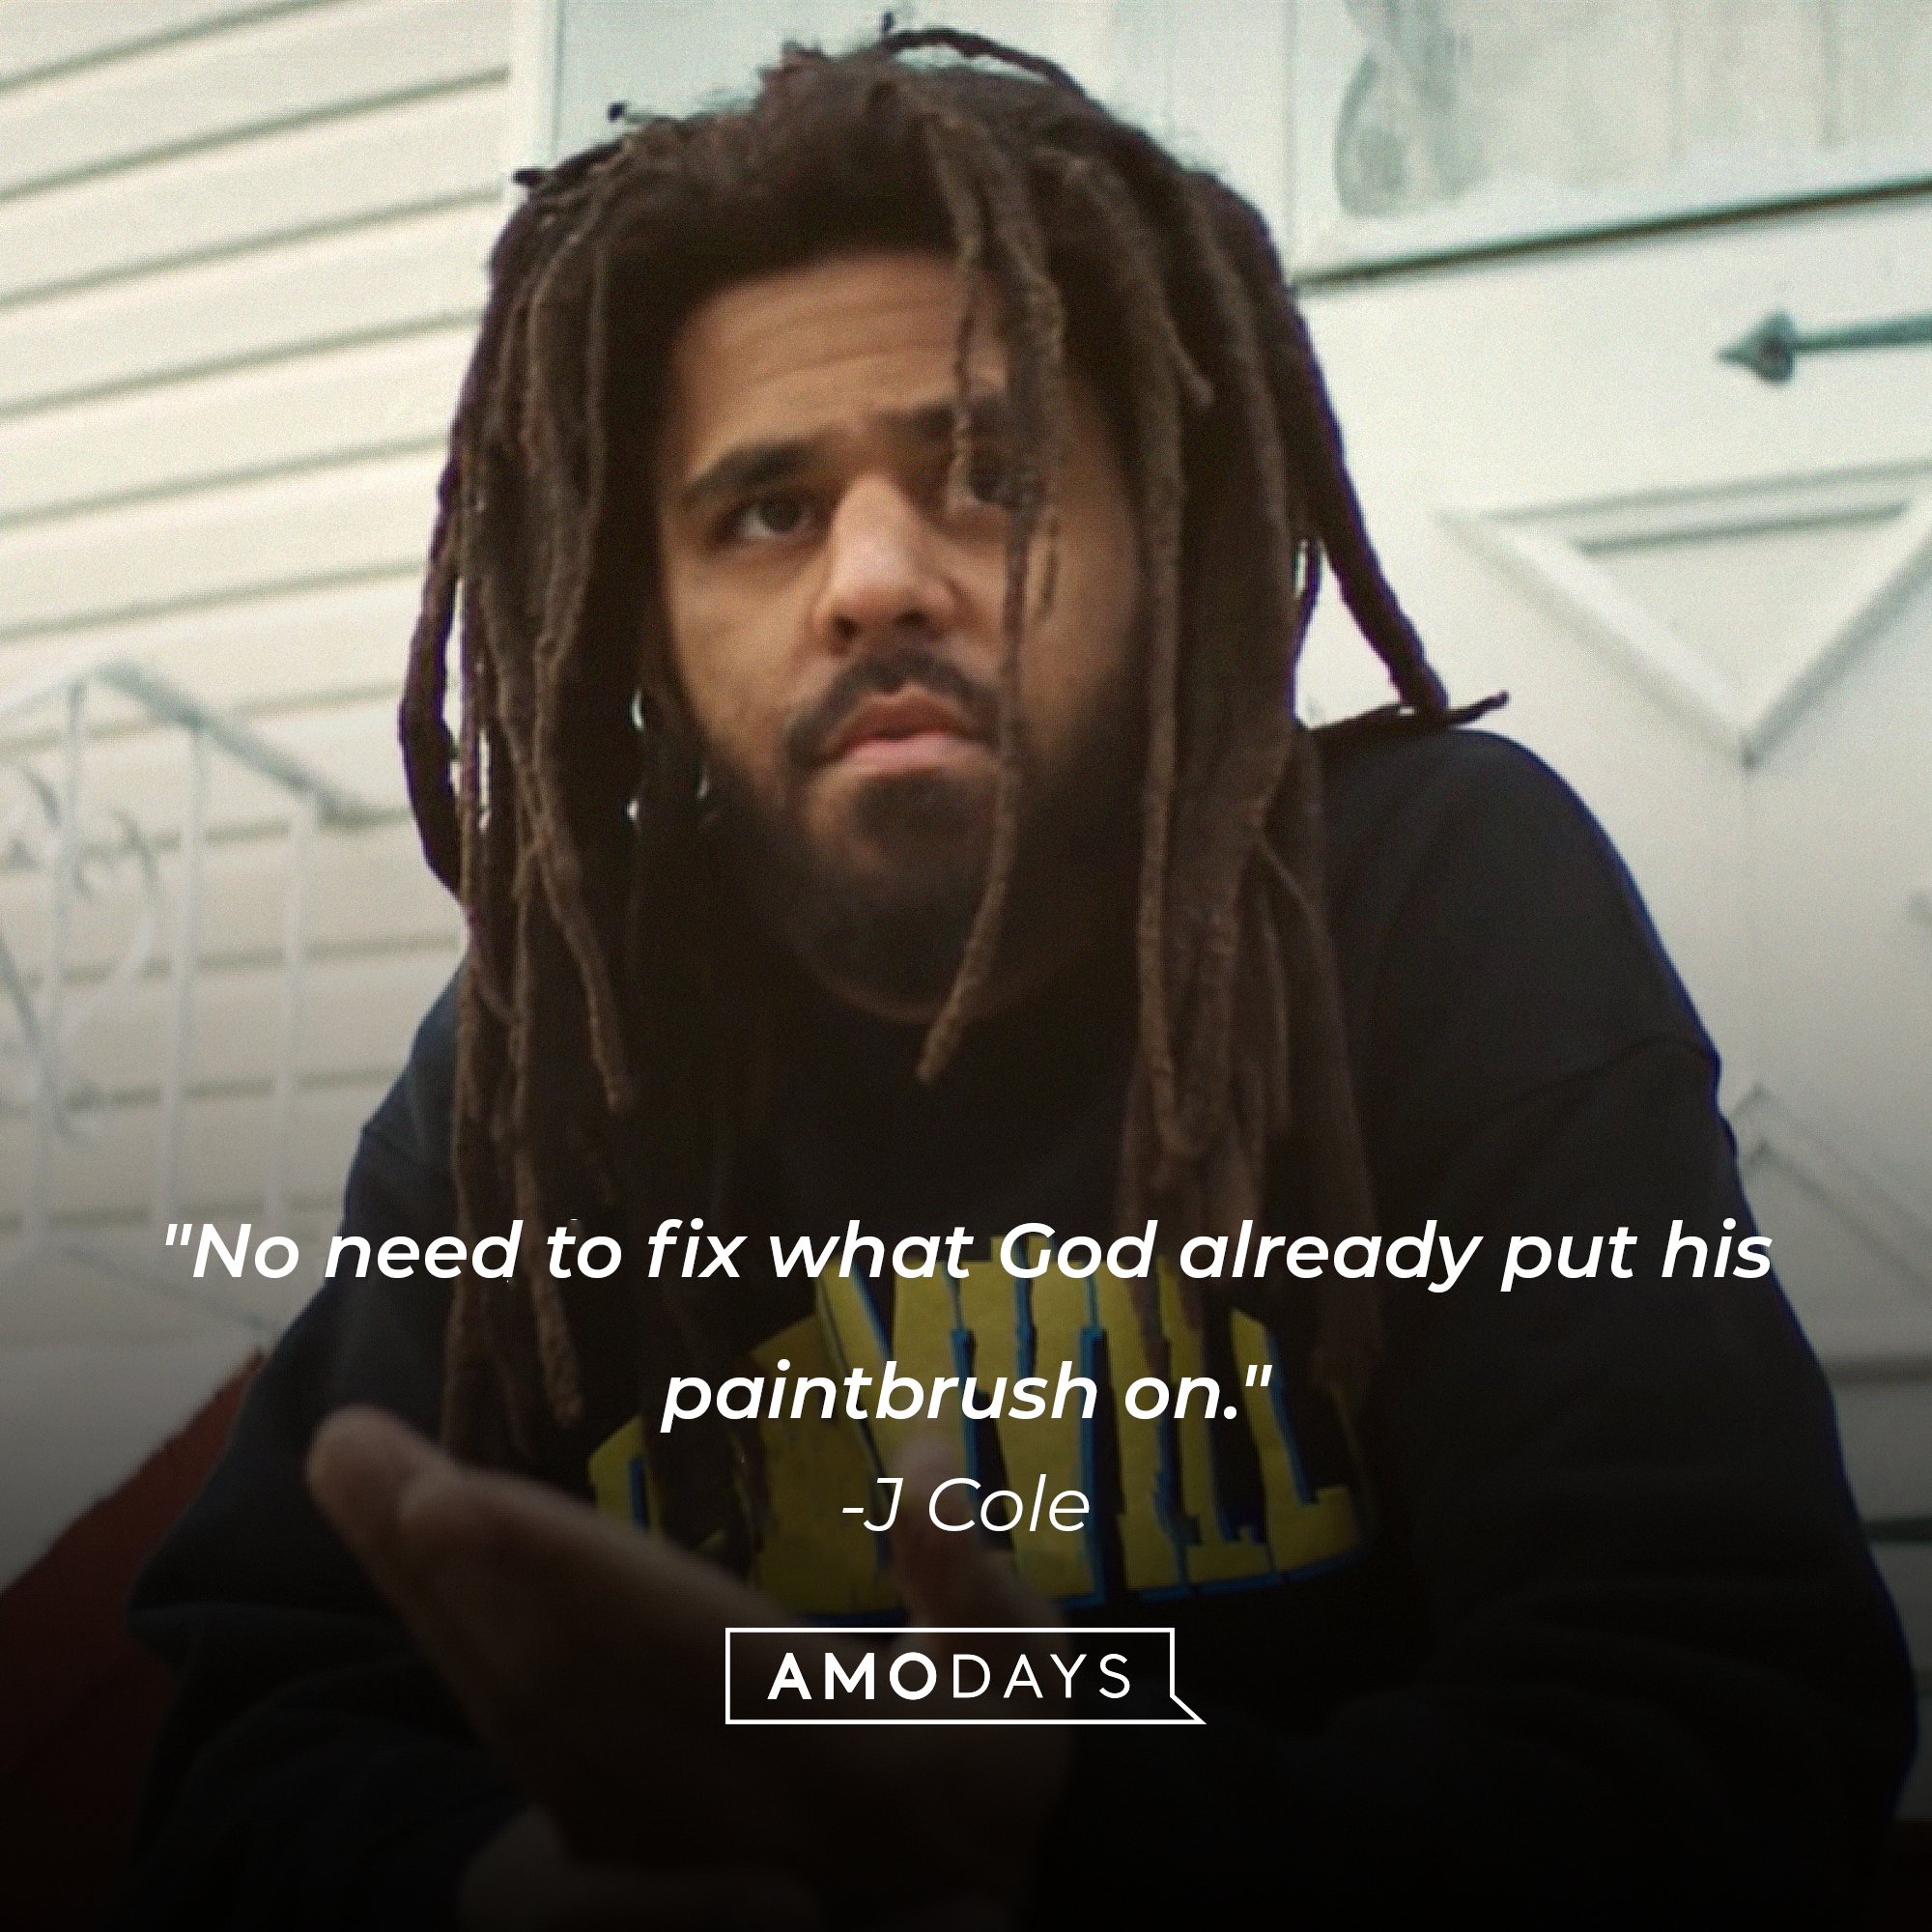 J Cole's quote: "No need to fix what God already put his paintbrush on." | Image: AmoDays